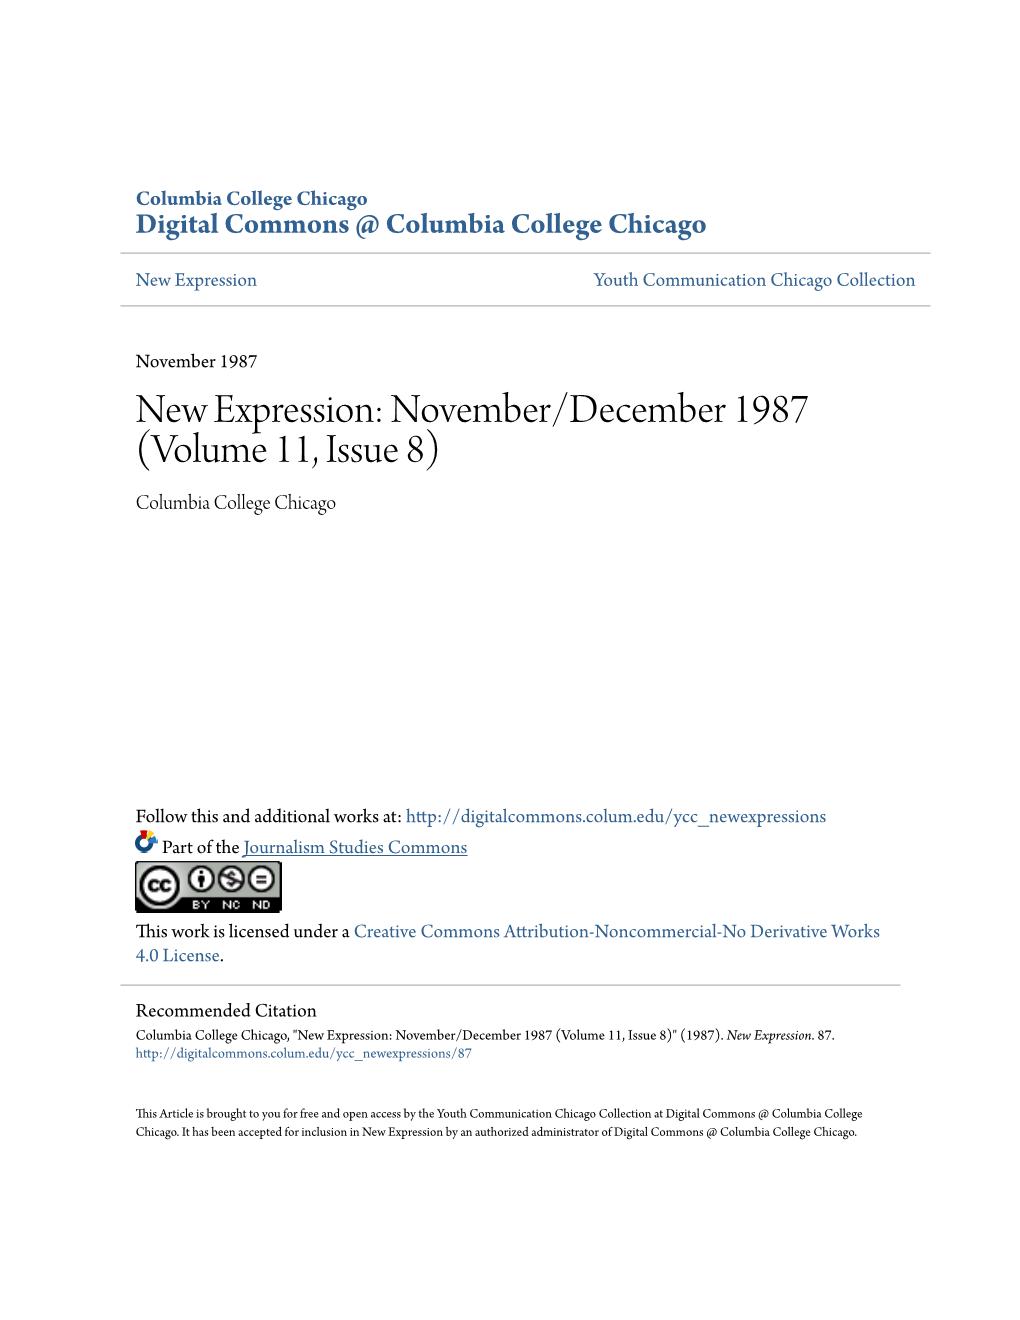 New Expression: November/December 1987 (Volume 11, Issue 8) Columbia College Chicago